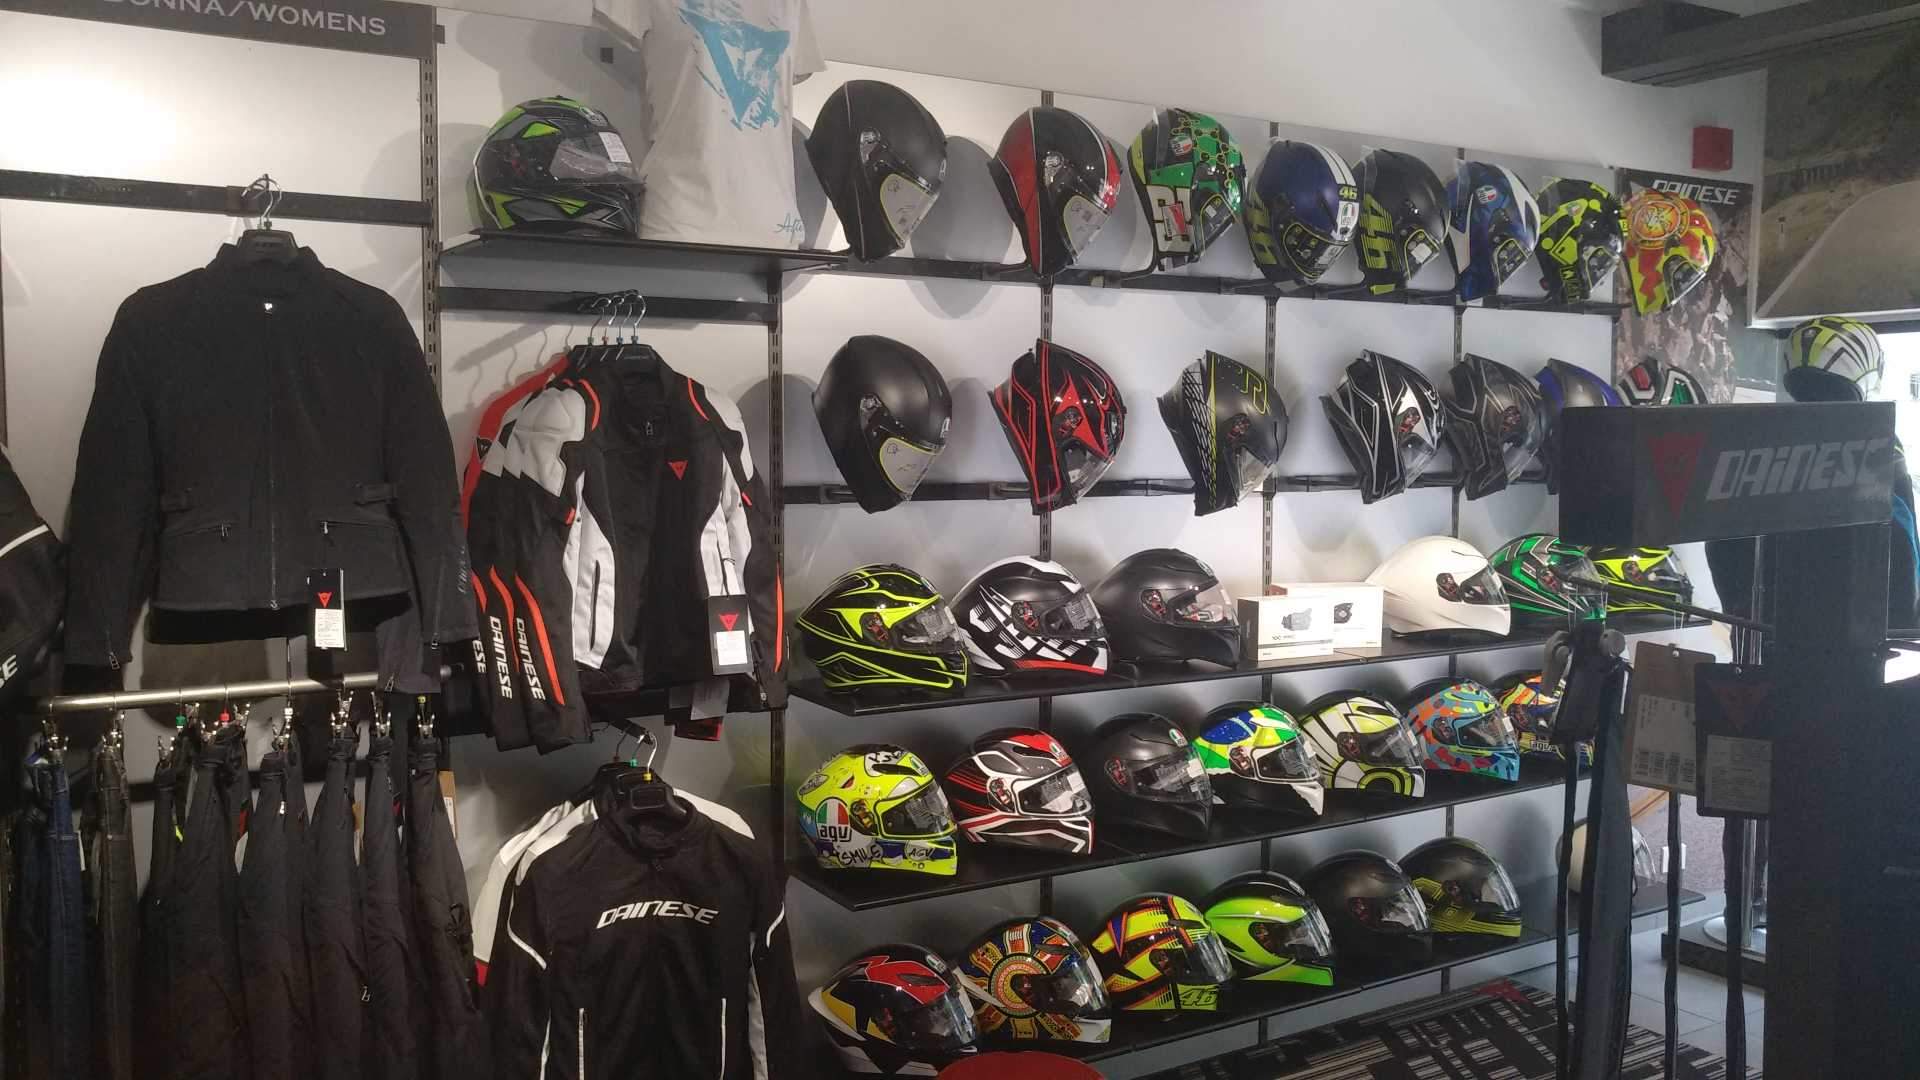 Dainese & Agv Photos, Lavelle Road, Bangalore - Motorcycle Helmet , HD Wallpaper & Backgrounds